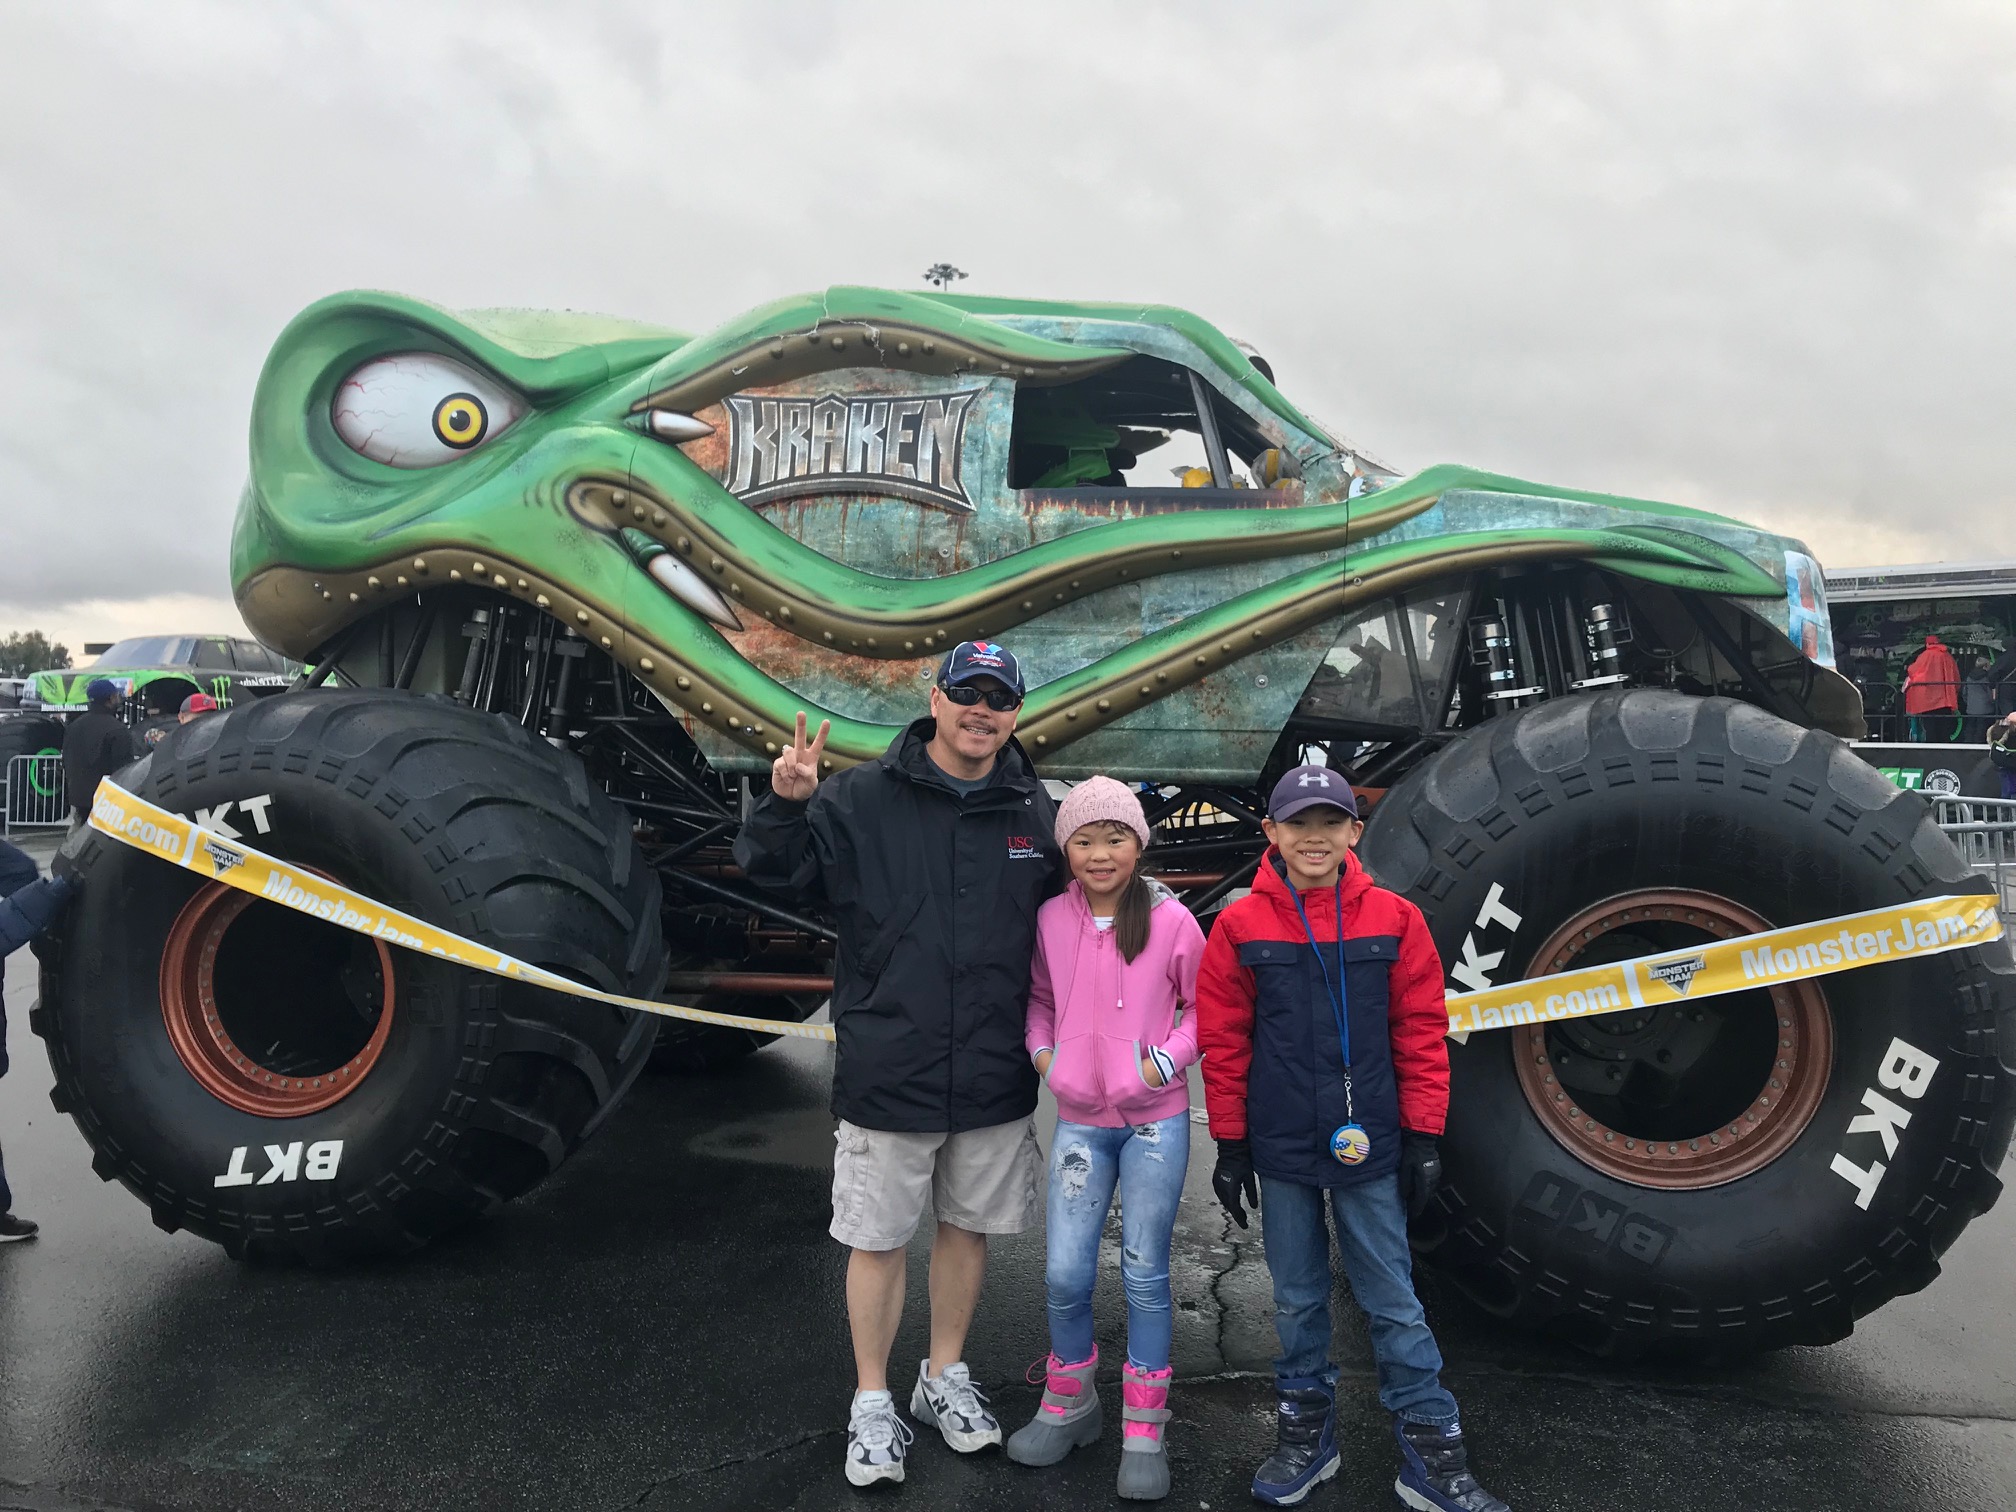 Monster Jam live event returns to Anaheim in Angels Stadium after